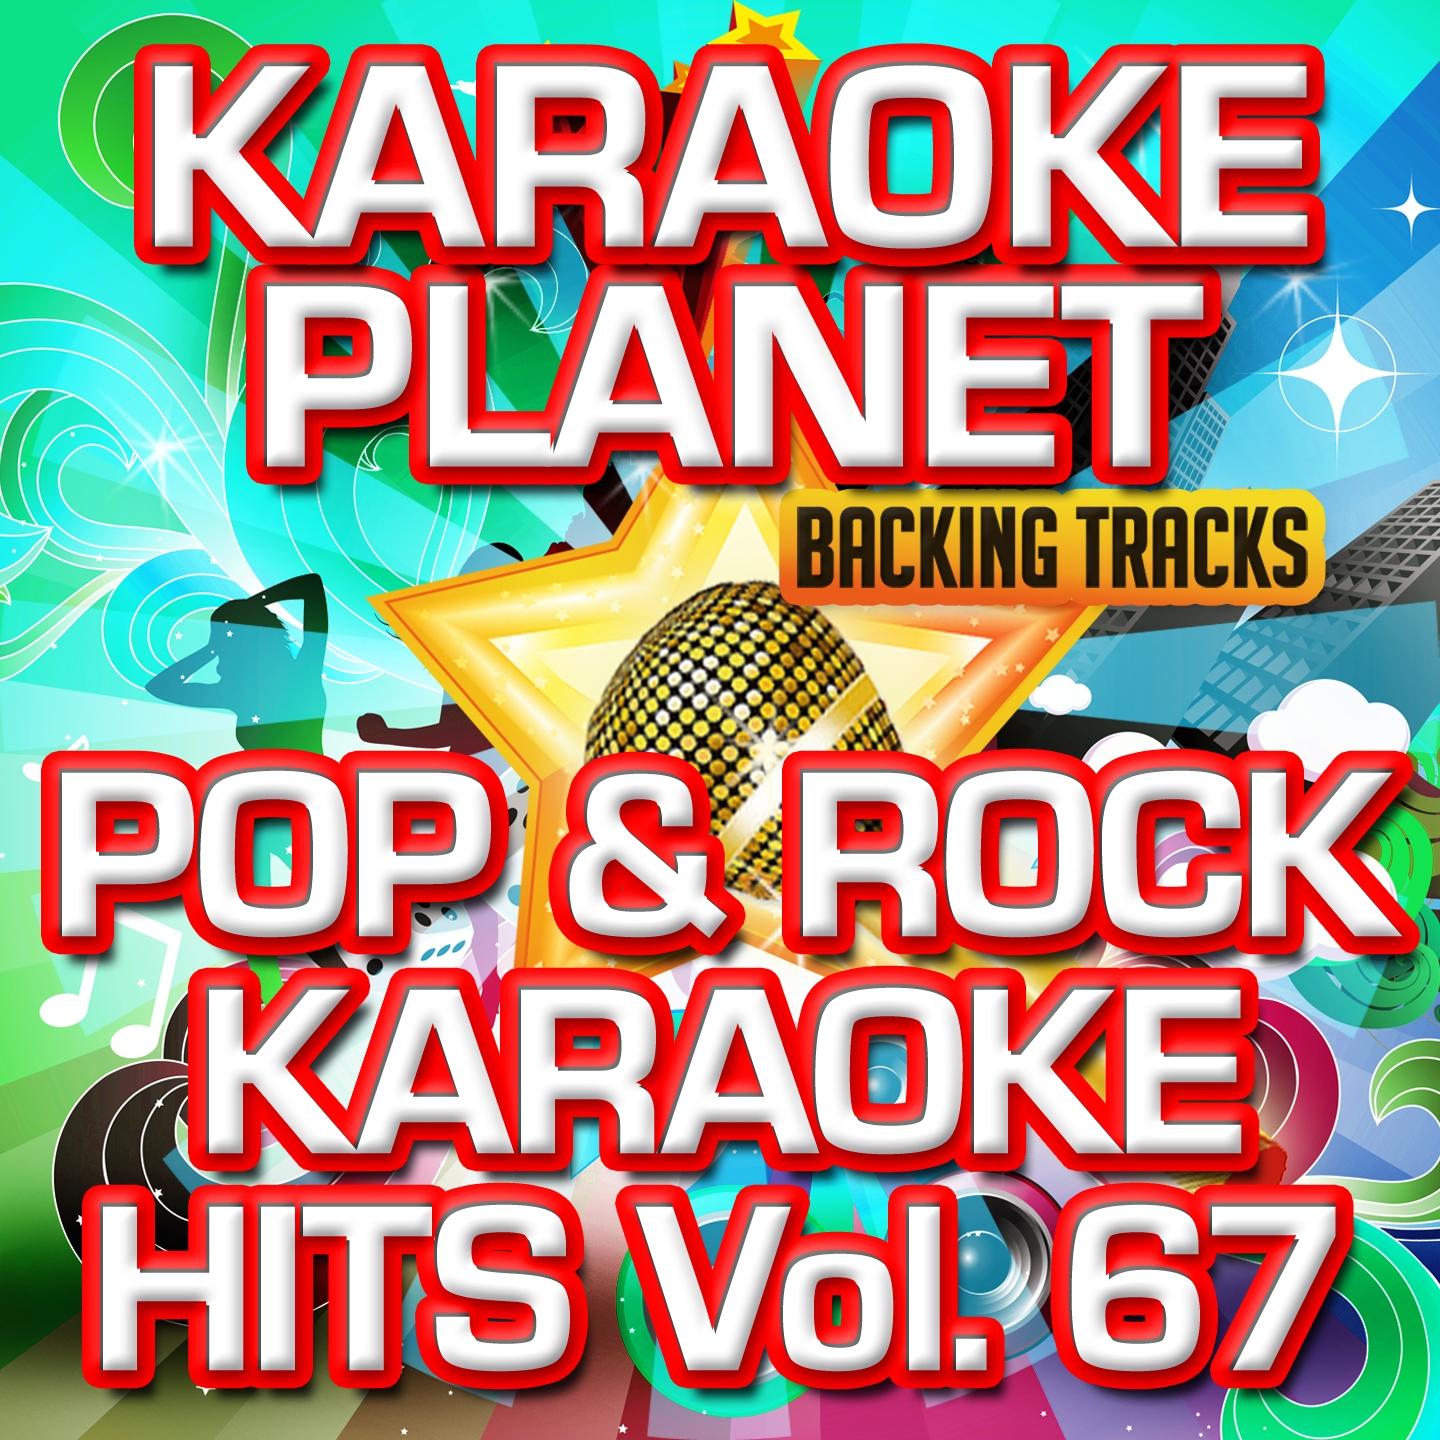 Every Little Part of Me (Karaoke Version With Background Vocals)